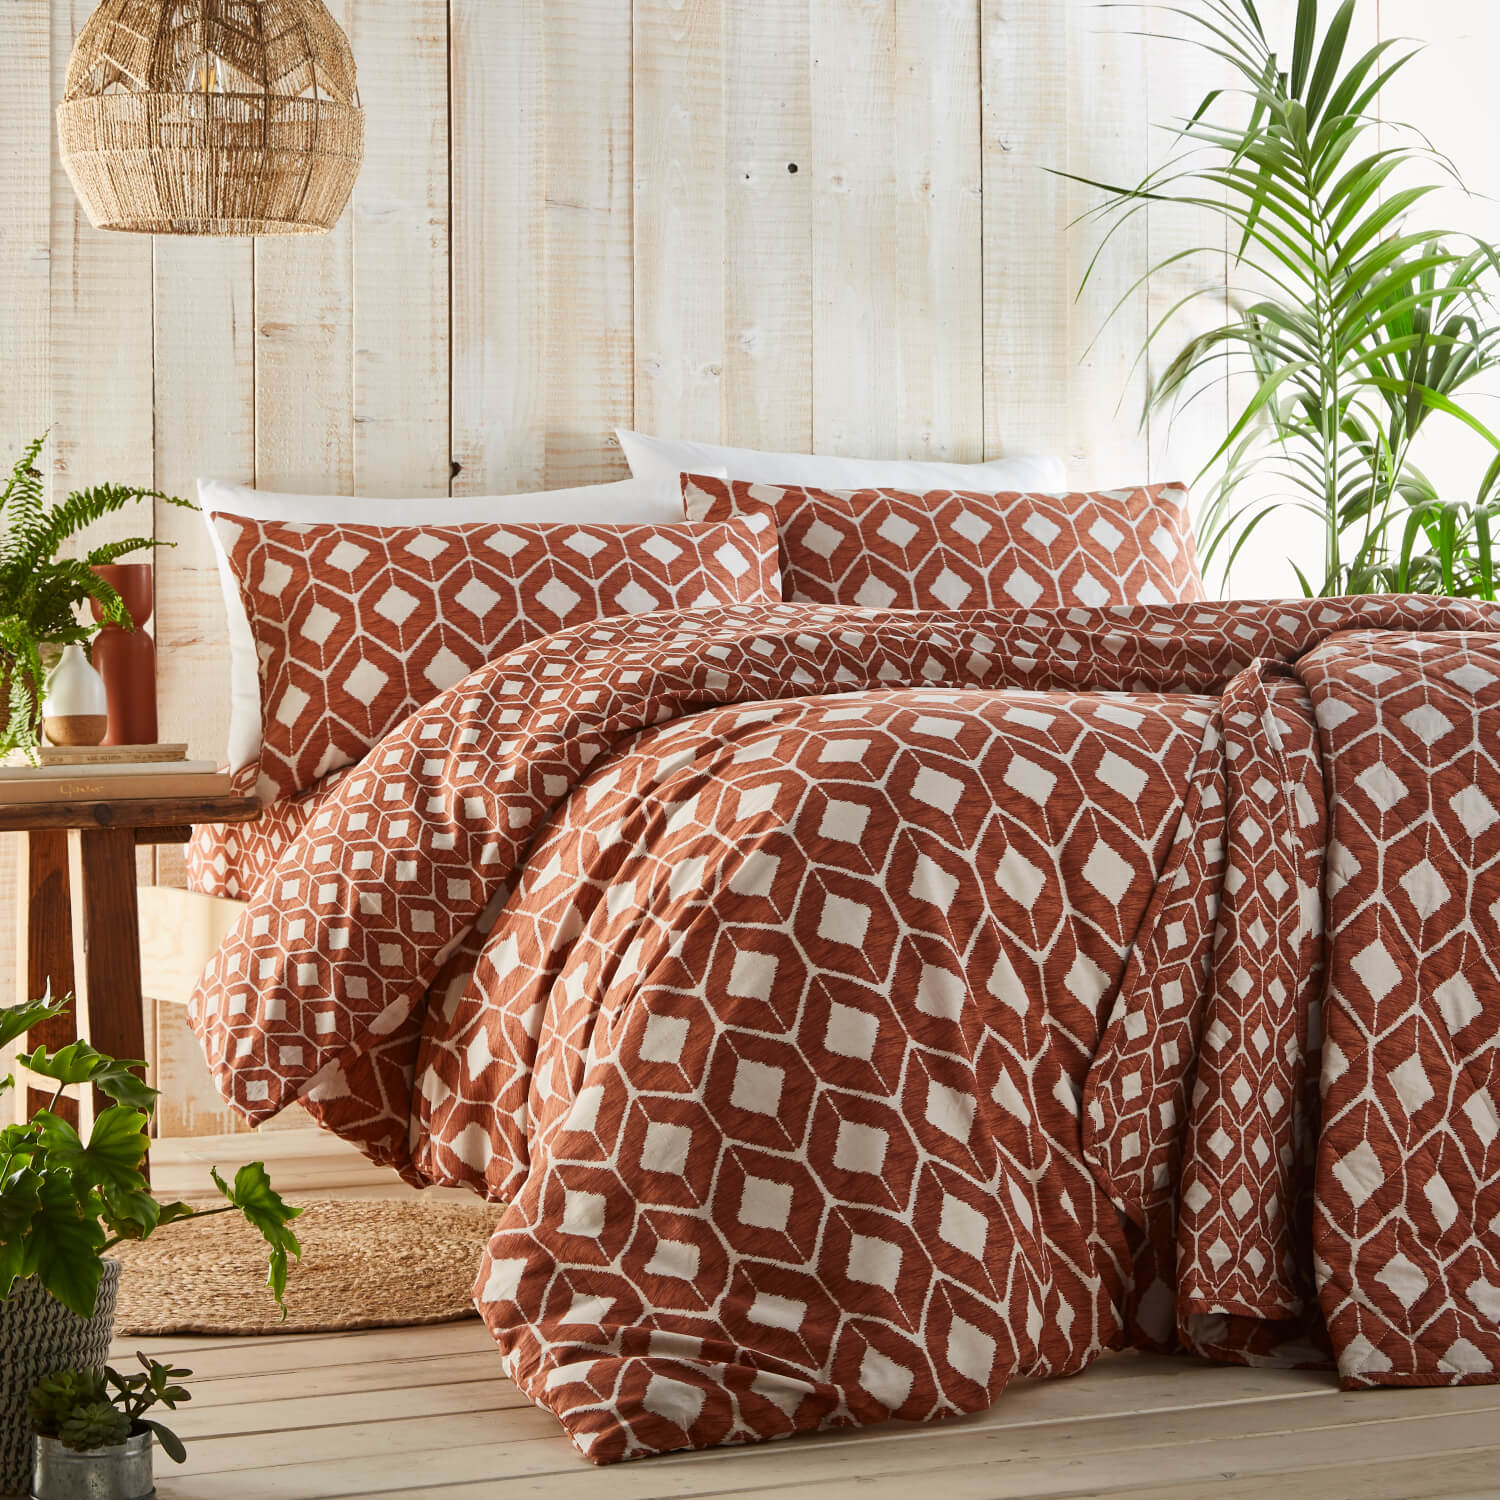 The Home Bedroom Chevron Throwover - Terracotta 1 Shaws Department Stores